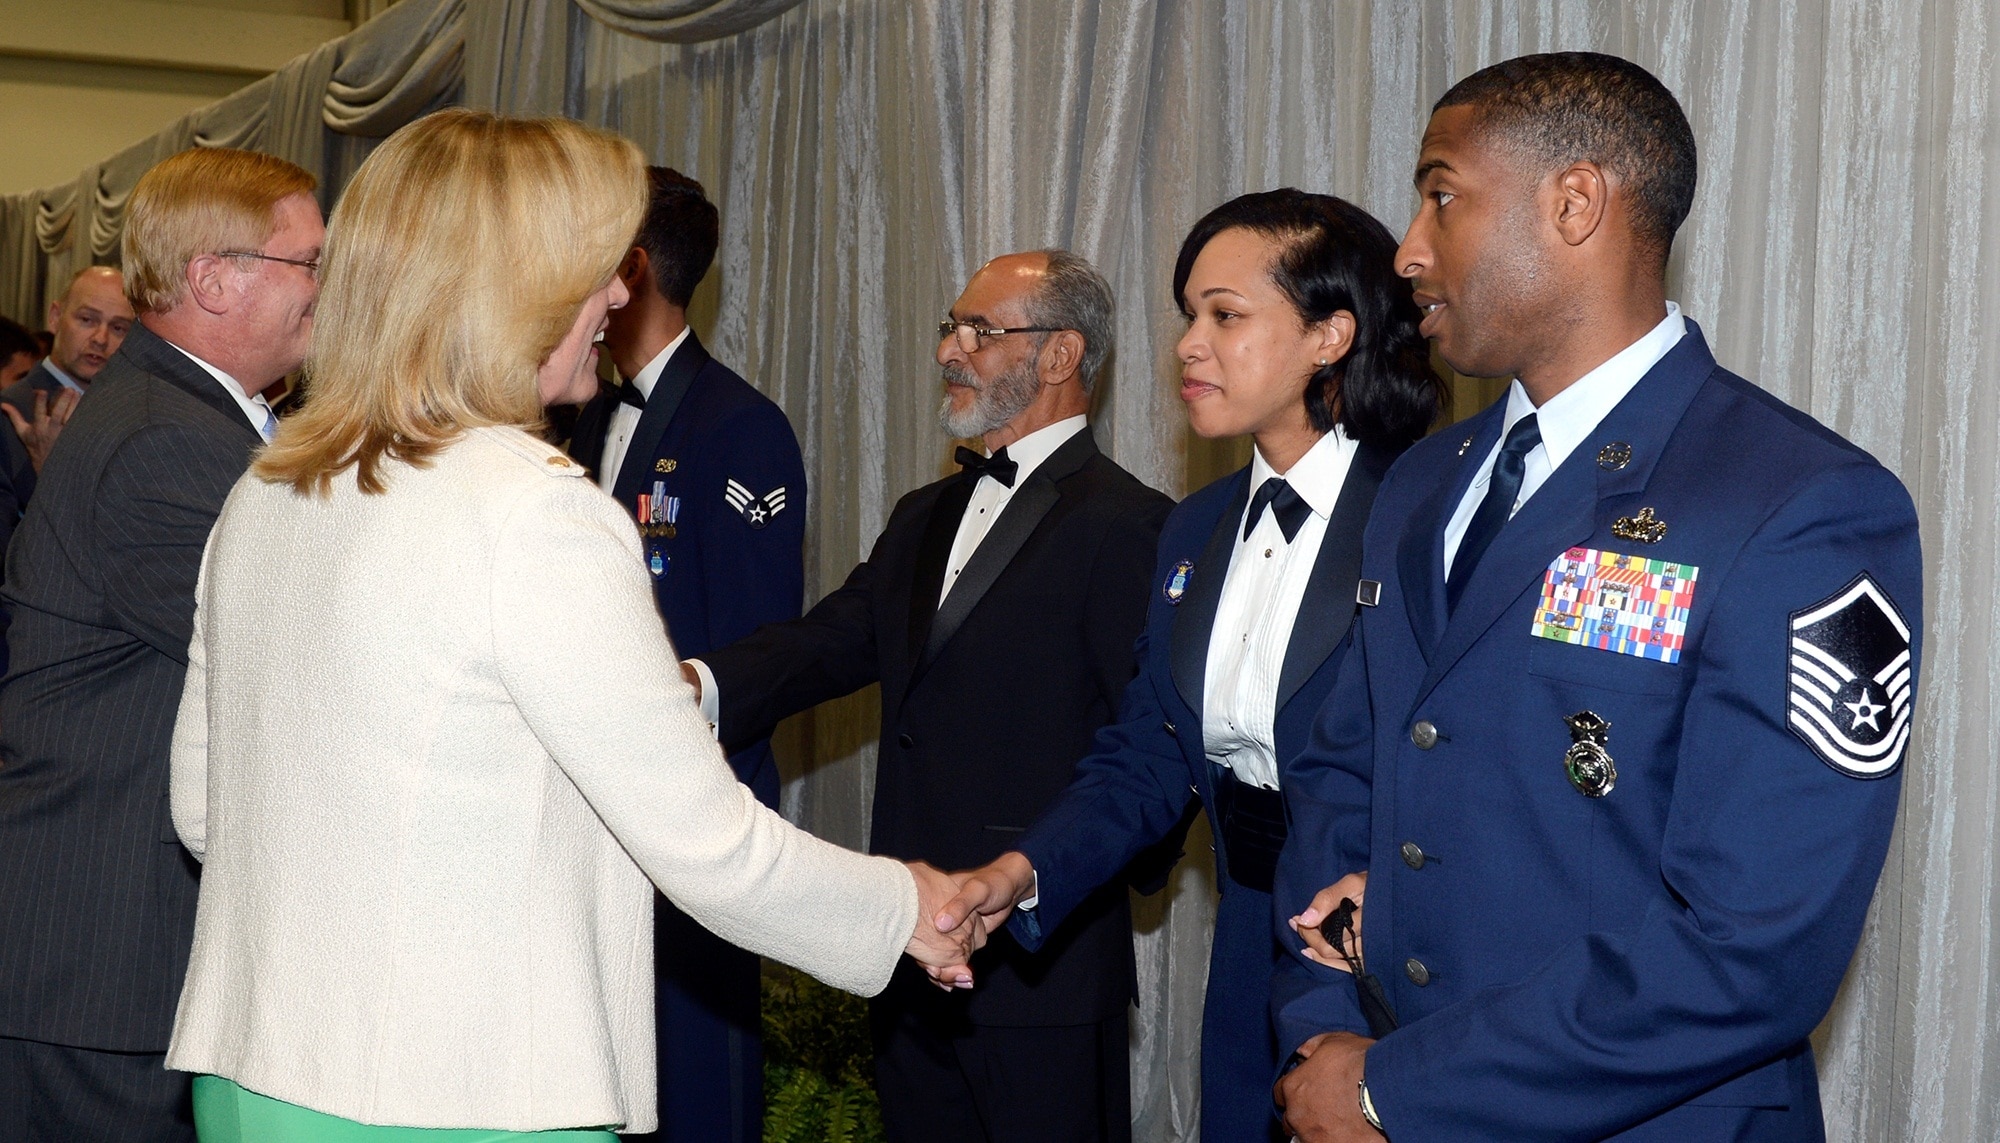 Secretary of the Air Force Deborah Lee James greets Tech. Sgt. Latoria R. Ellis, from the 502nd Contracting Squadron, 502nd Air Base Wing, Joint Base San Antonio-Lackland, Texas. Ellis is one of the 12 Outstanding Airmen of the Year for 2014 who attended a reception and awards dinner during the 2014 Air Force Association's Air & Space Conference and Technology Exposition on Sept. 15, 2014 in Washington, D.C. Other senior leaders in attendance included Chief of Staff of the Air Force General Mark A. Welsh III and his wife, Betty, and Chief Master Sgt. of the Air Force James Cody and his wife, retired Chief Master Sgt. Athena Cody. (U.S. Air Force photo/Andy Morataya)